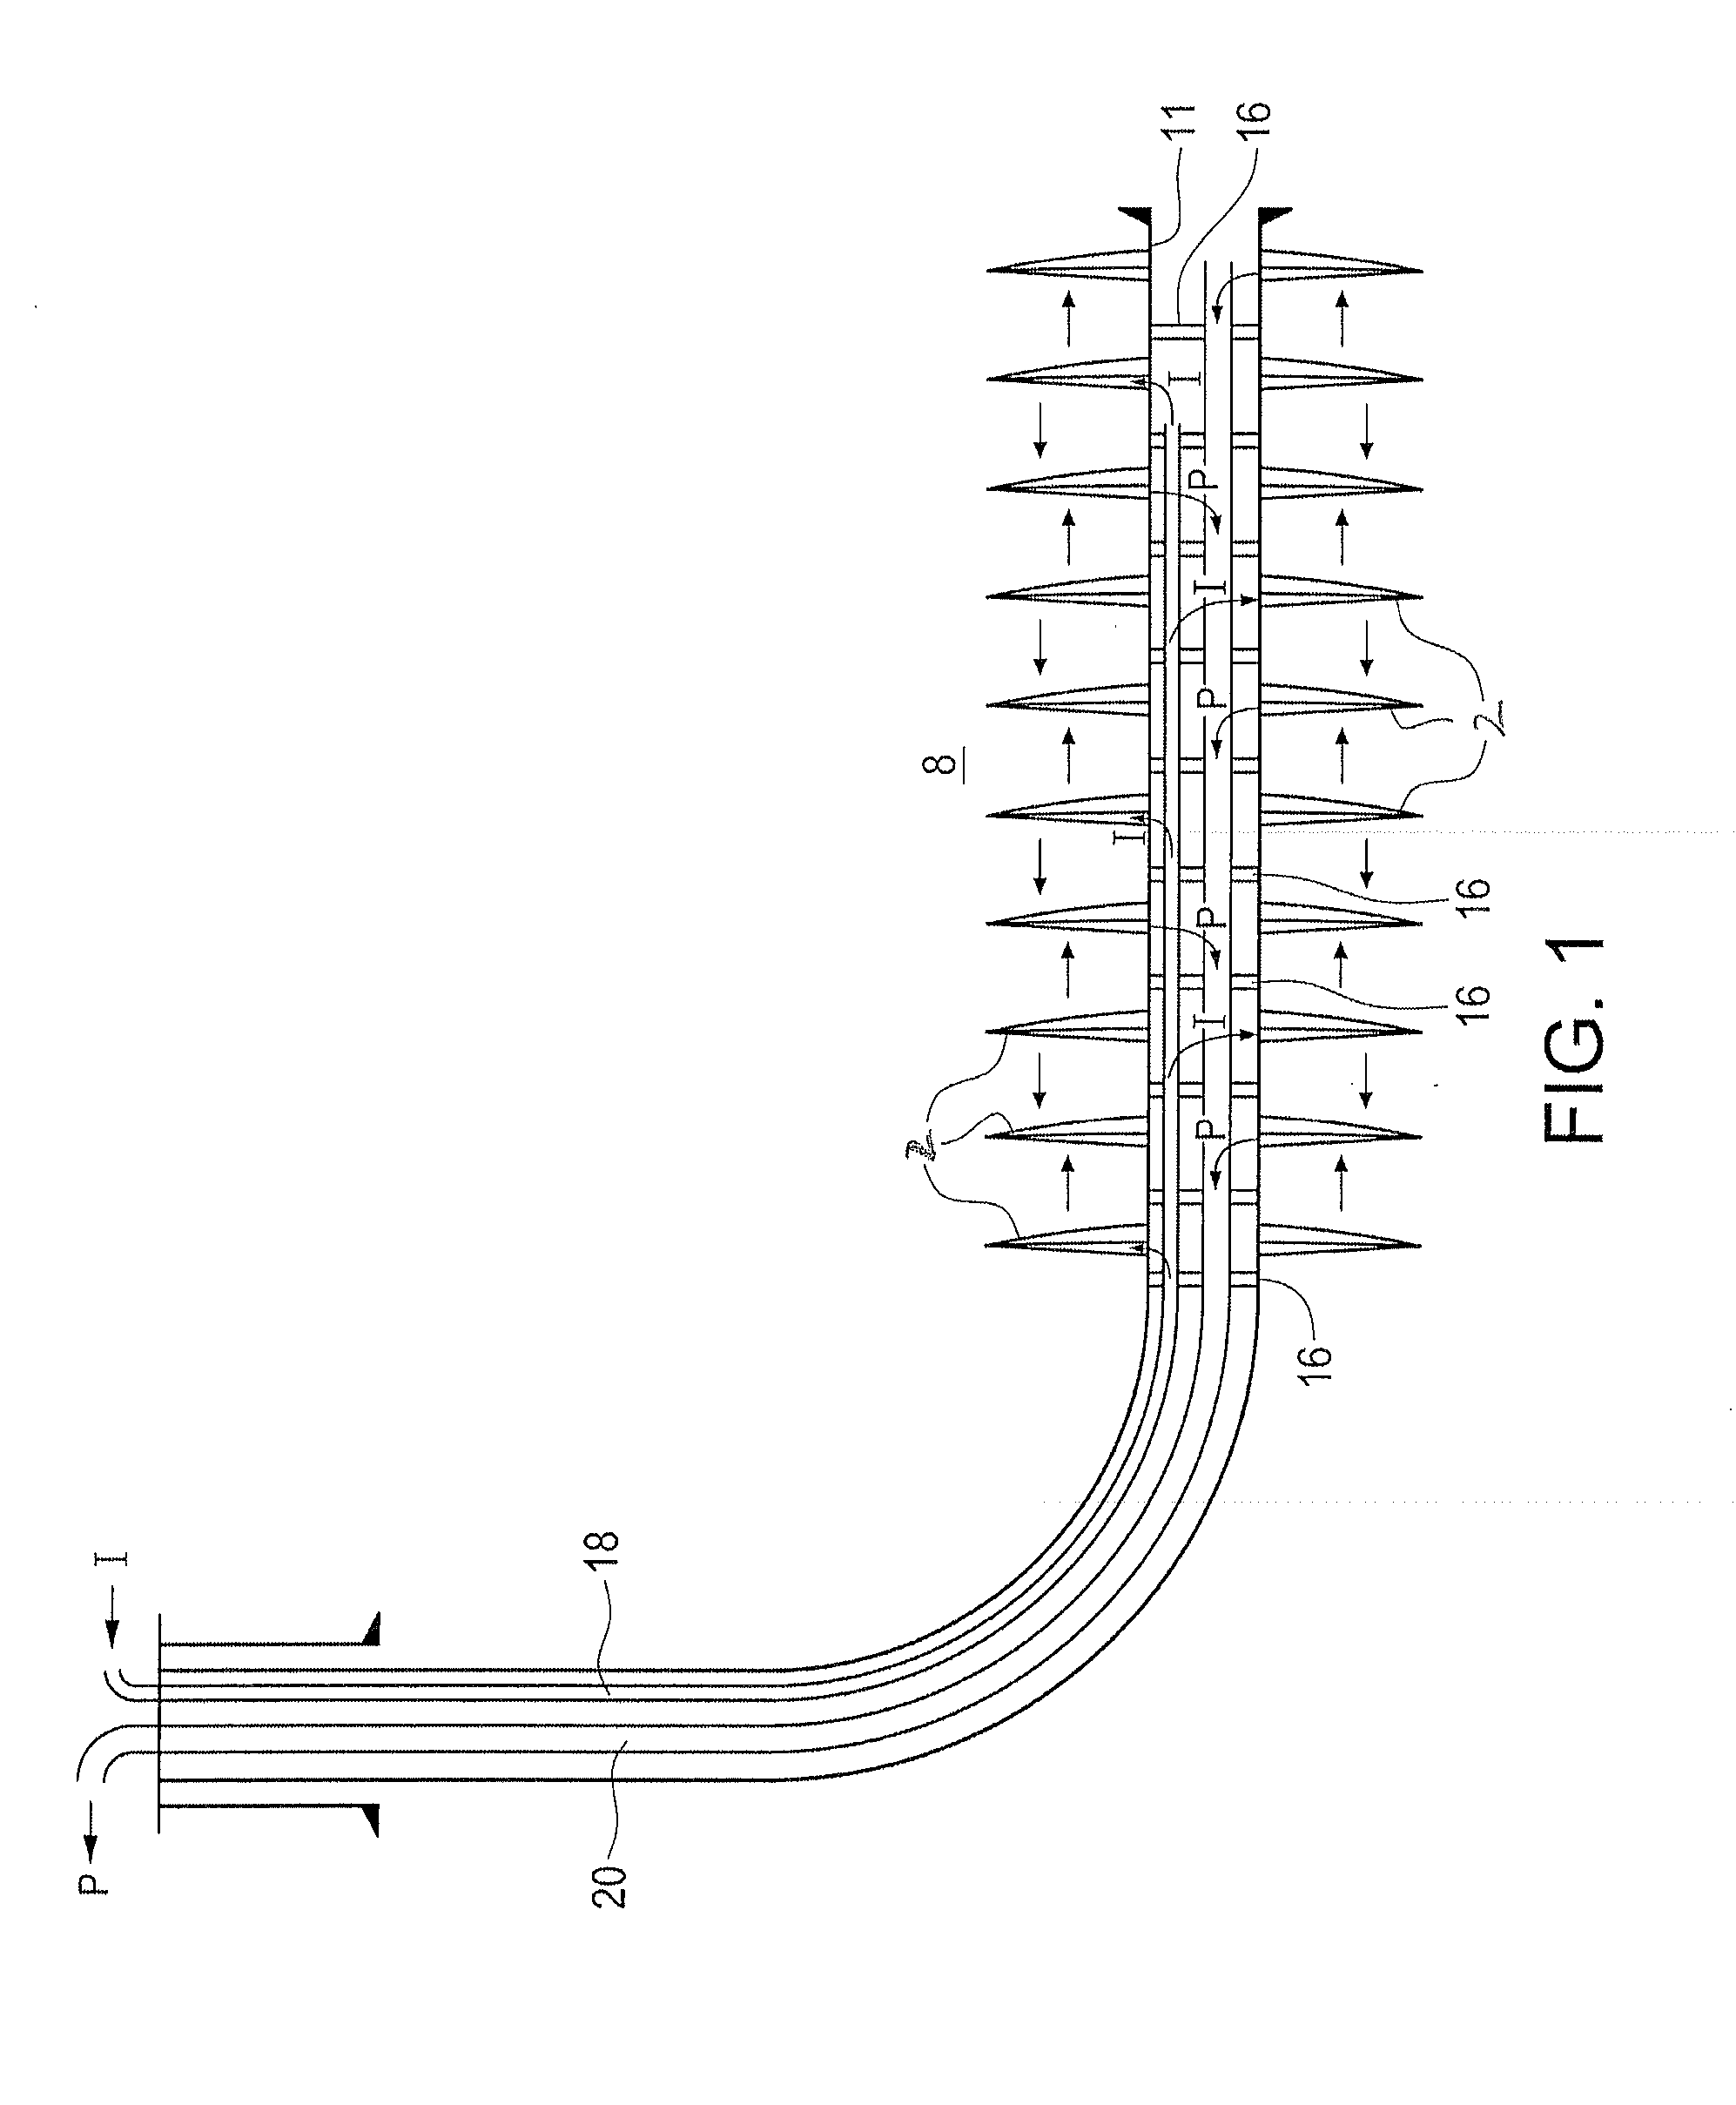 Well injection and production methods, apparatus and systems